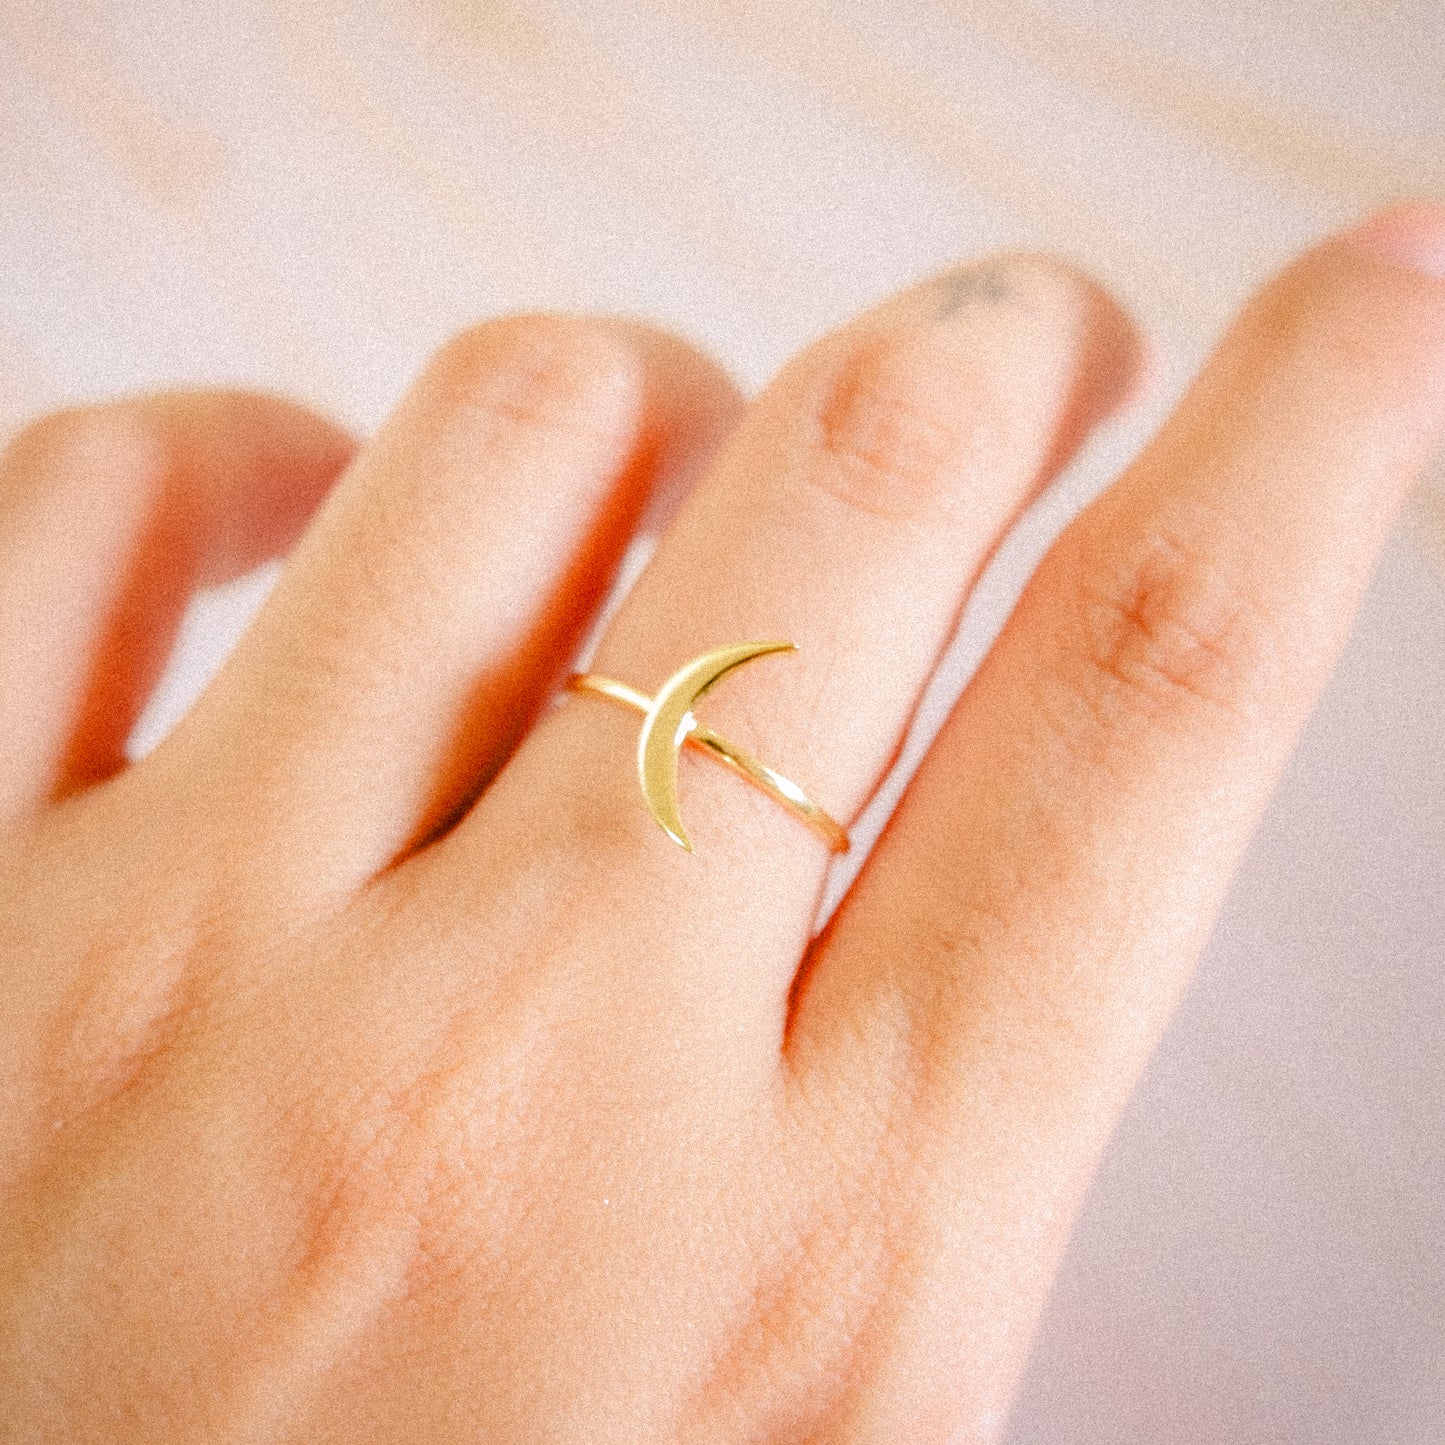 The Minimal Moon Ring in Solid Gold